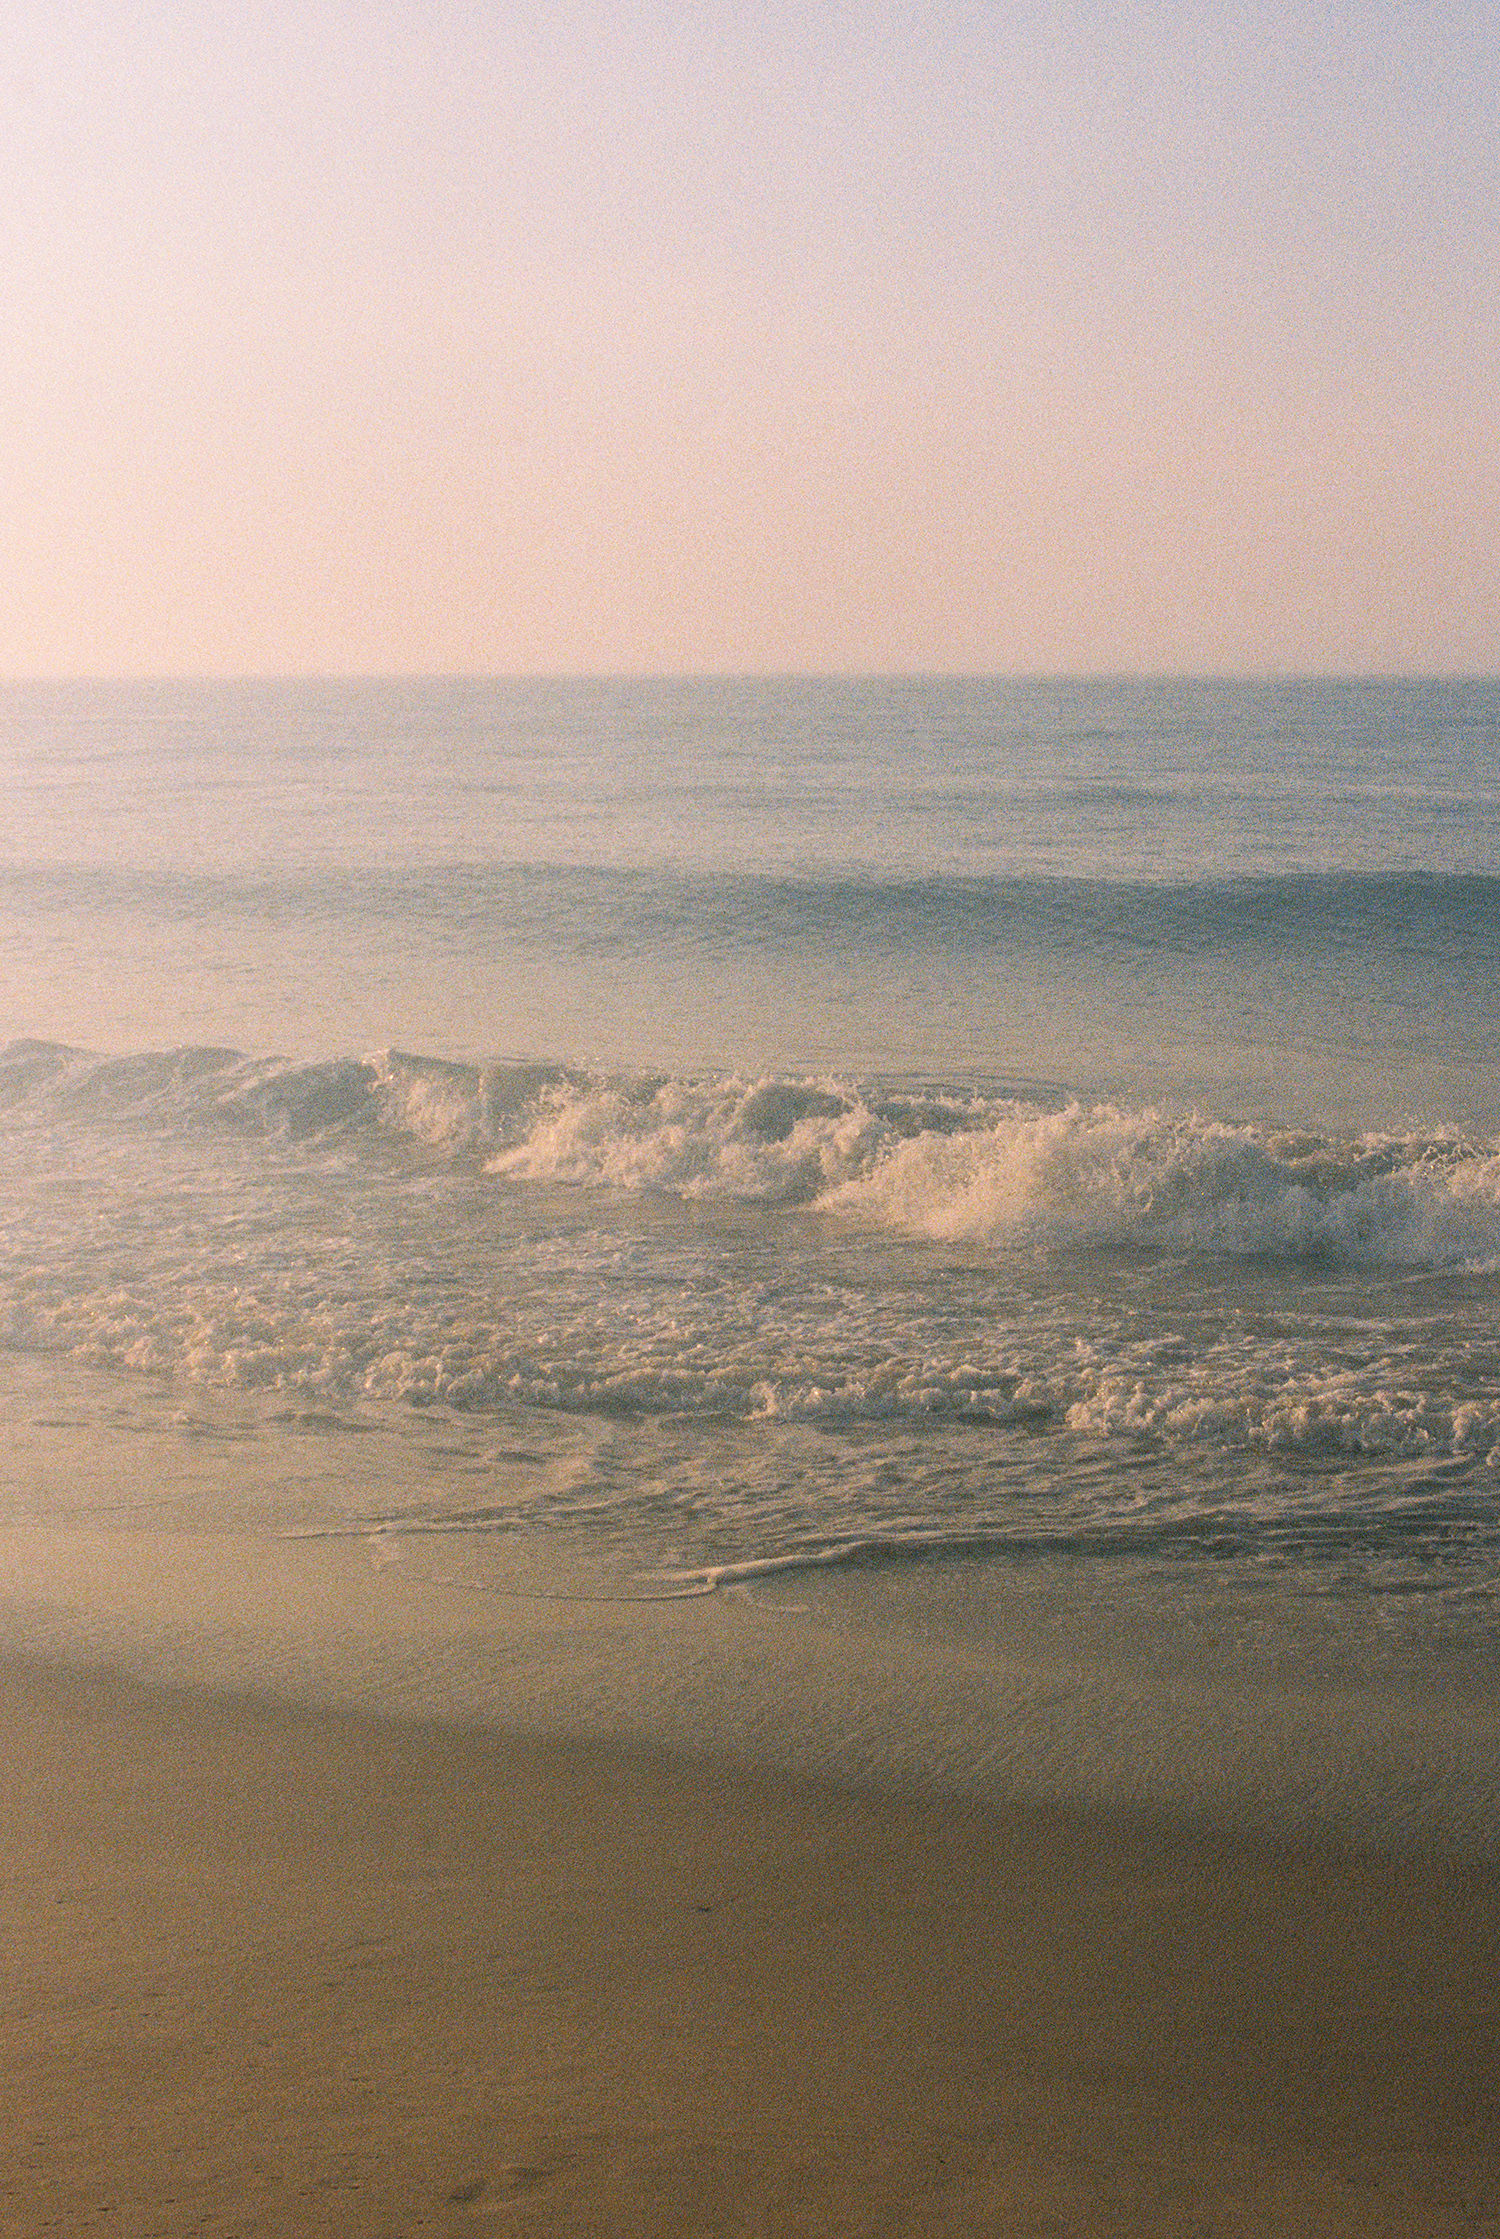 sunrise wave on film at Cape May